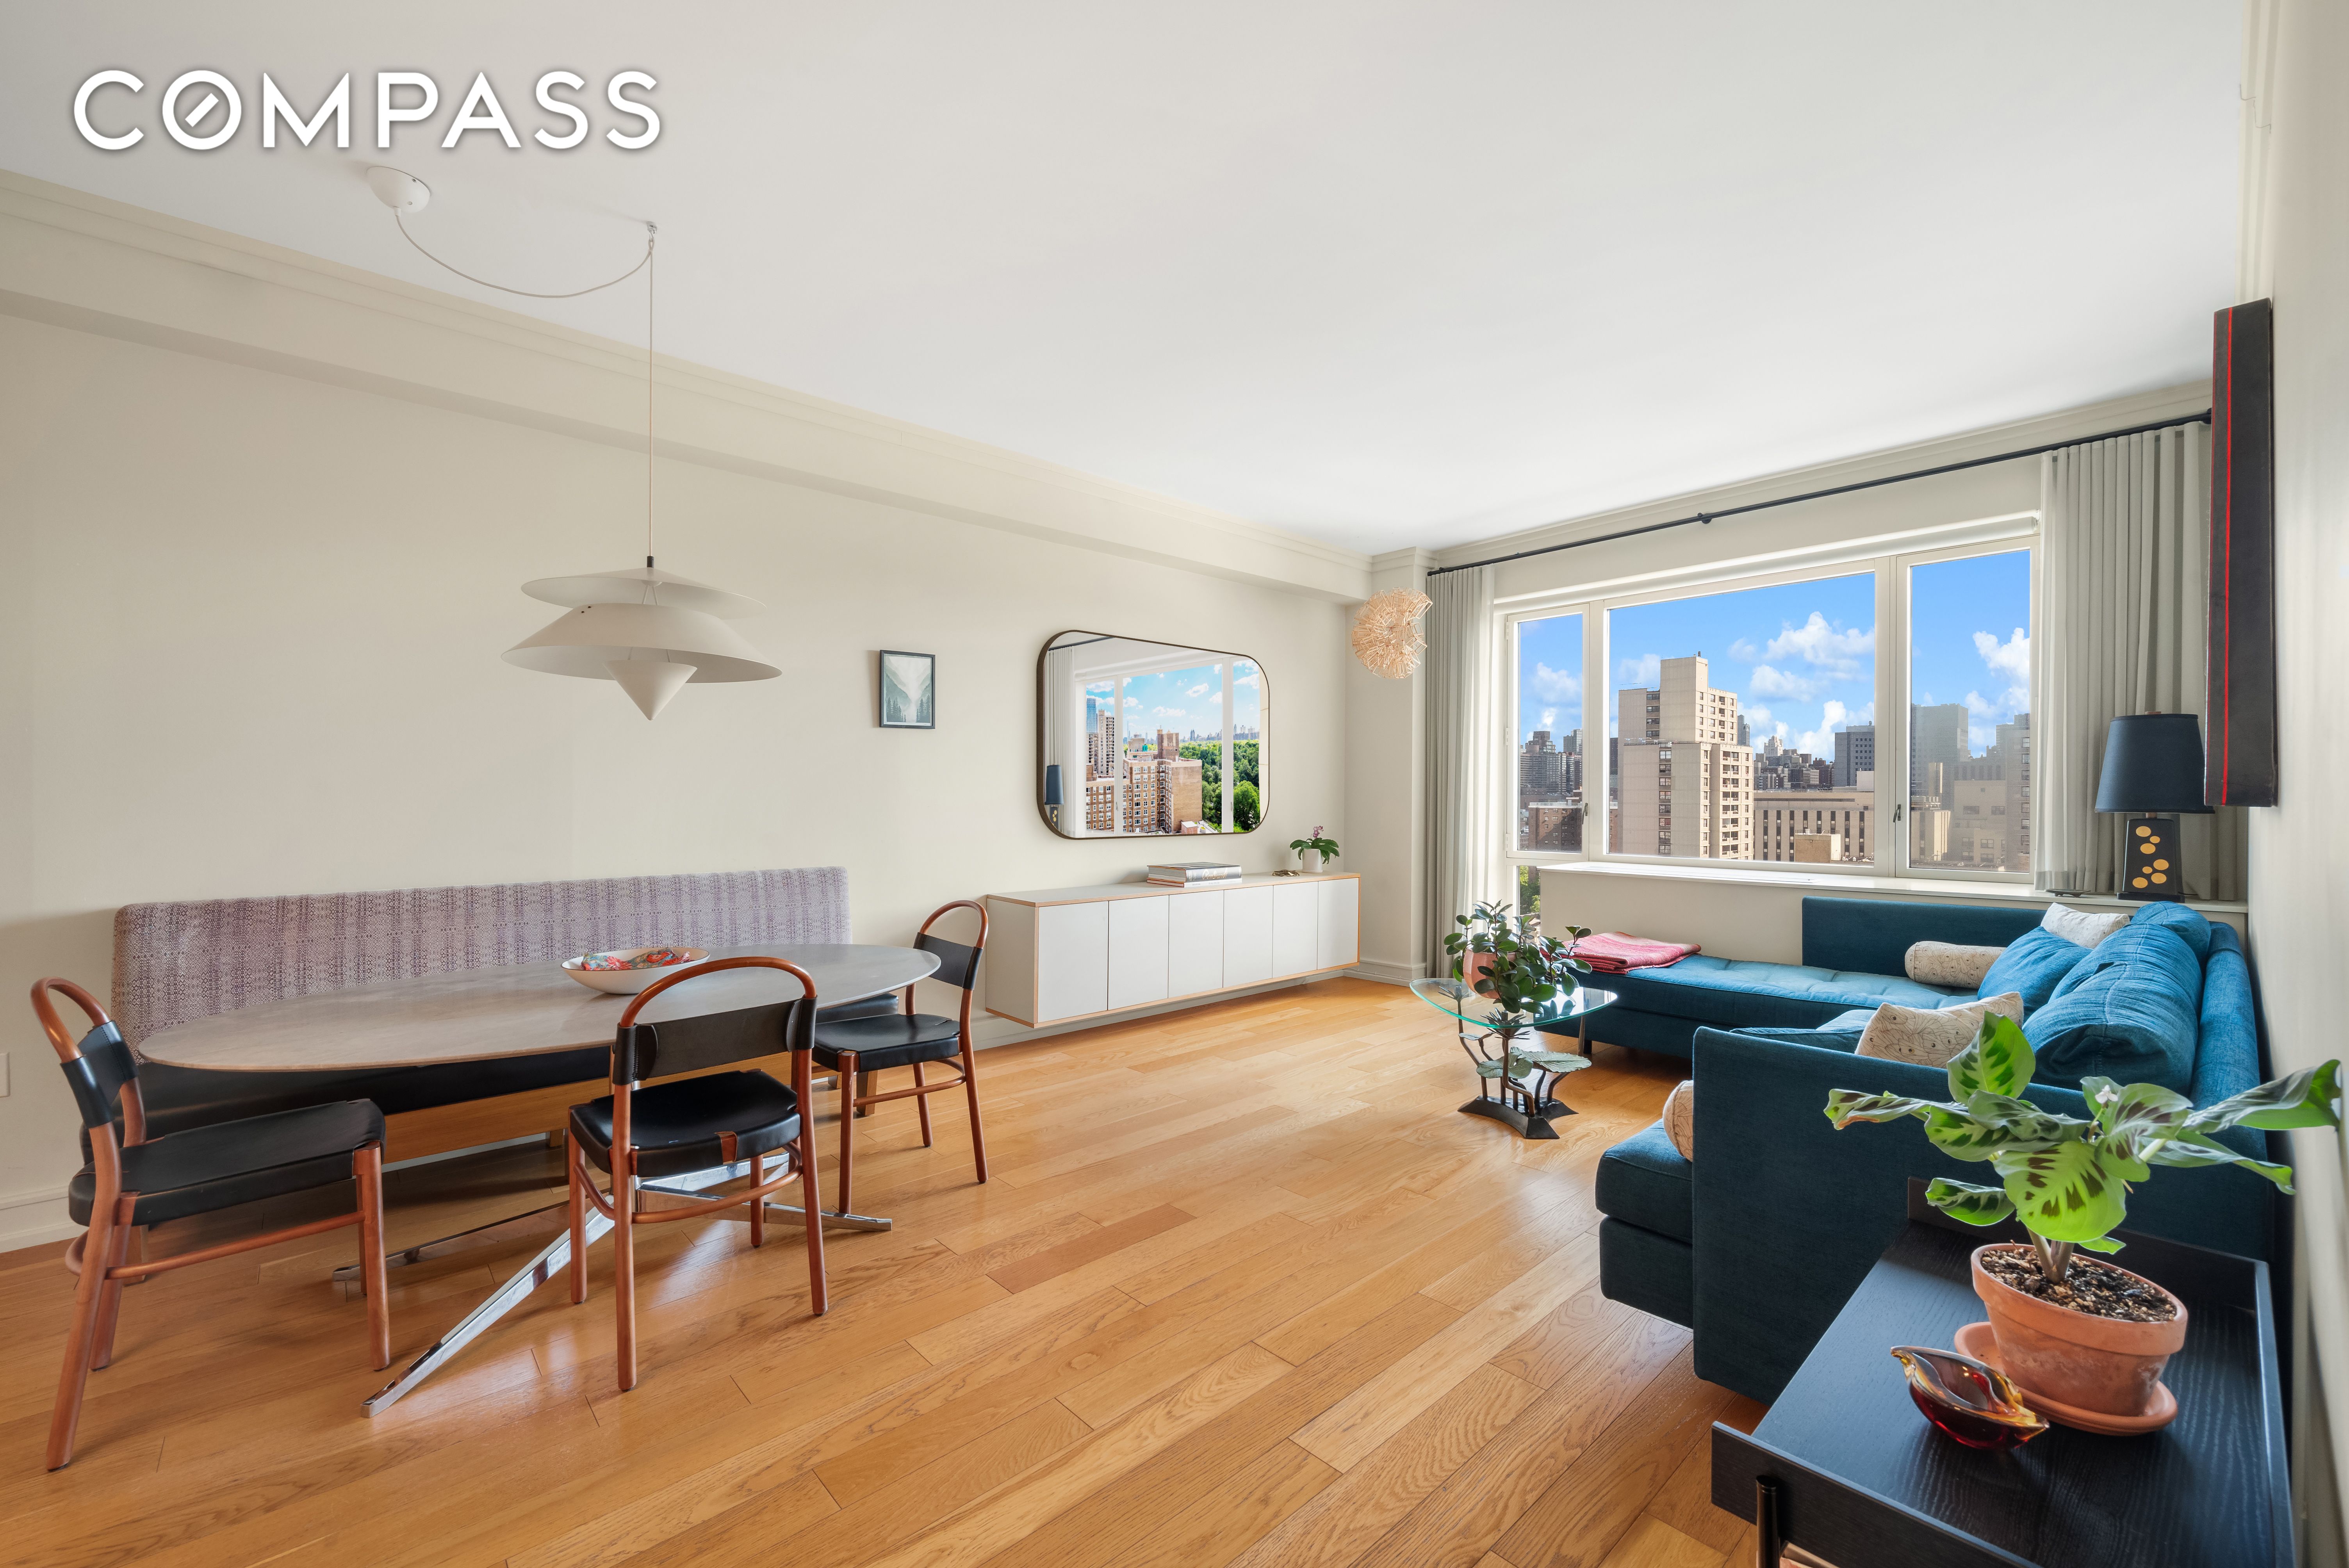 1280 5th Avenue 15D, Upper Carnegie Hill, Upper East Side, NYC - 3 Bedrooms  
2 Bathrooms  
5 Rooms - 